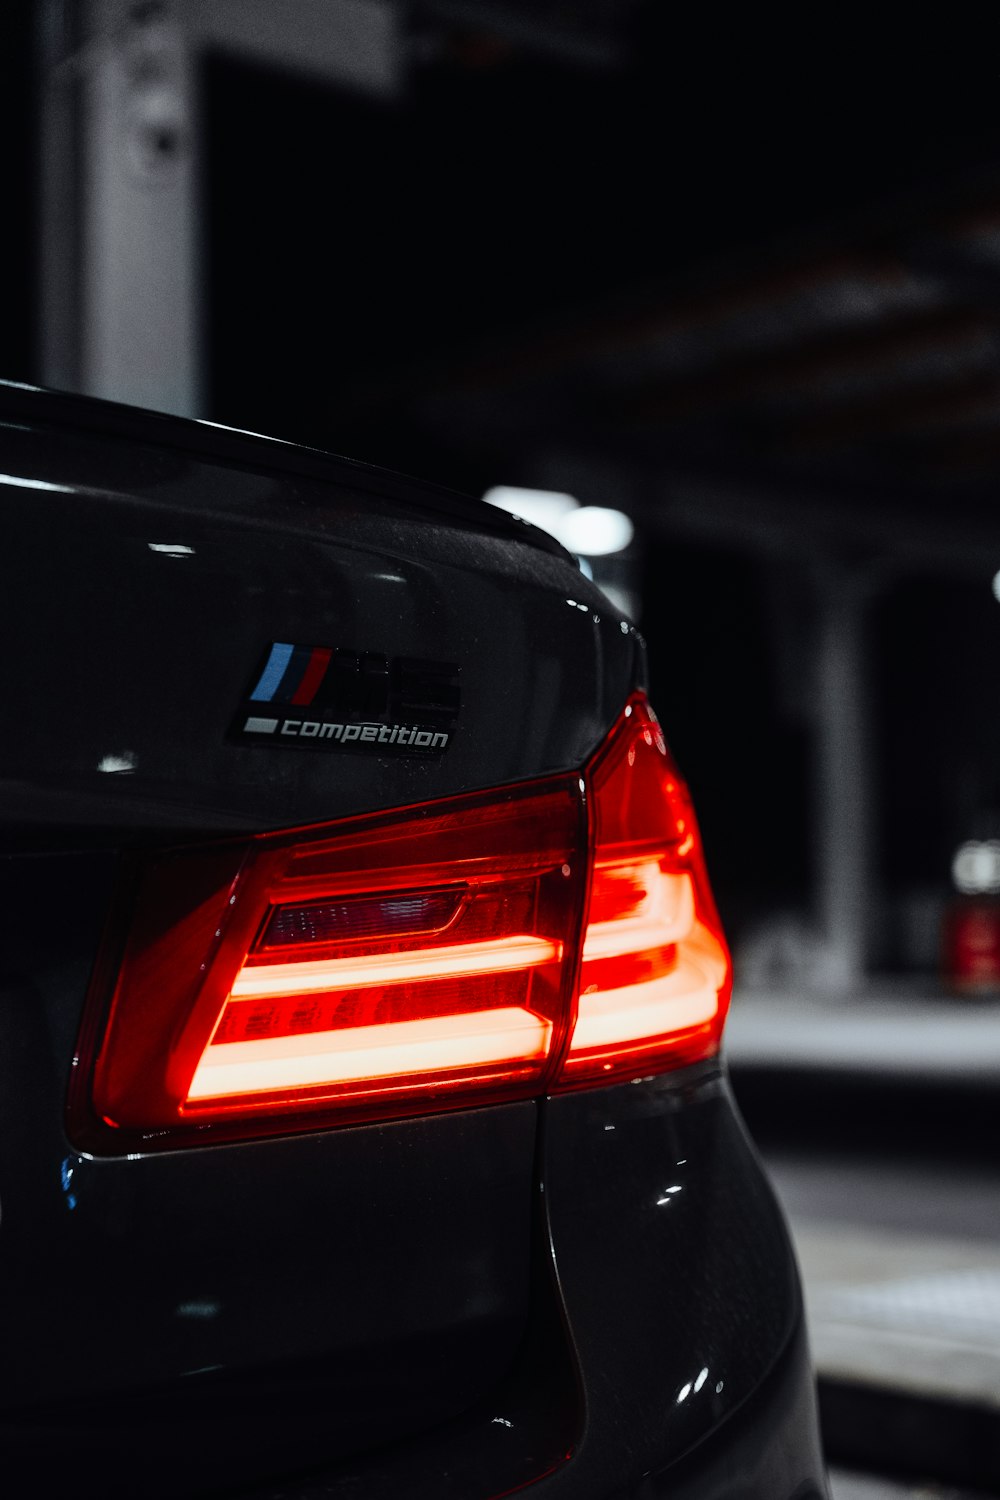 the tail lights of a bmw car in a parking garage